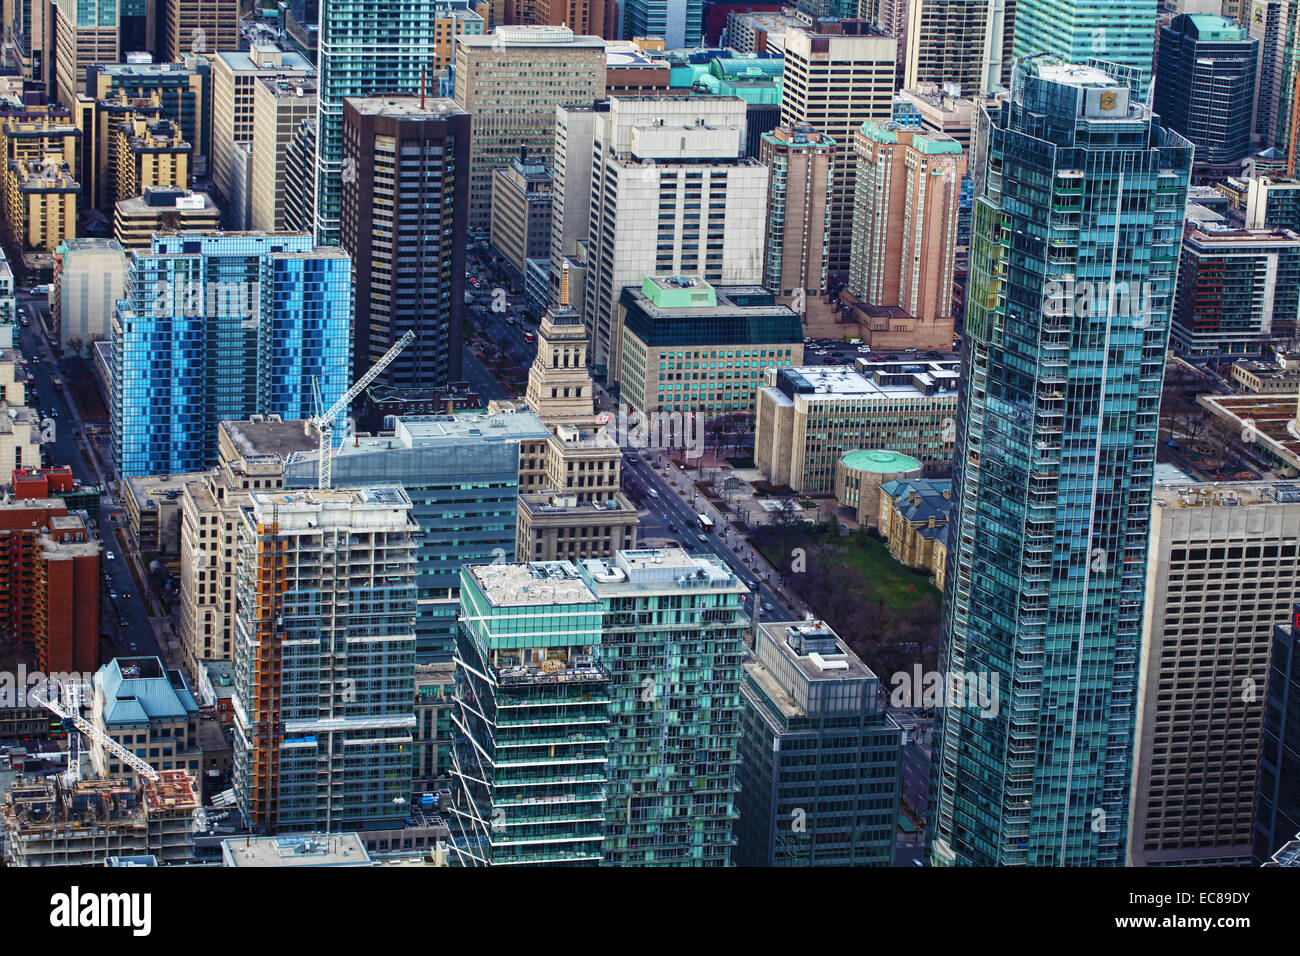 An aerial view of Toronto, Canada buildings Stock Photo